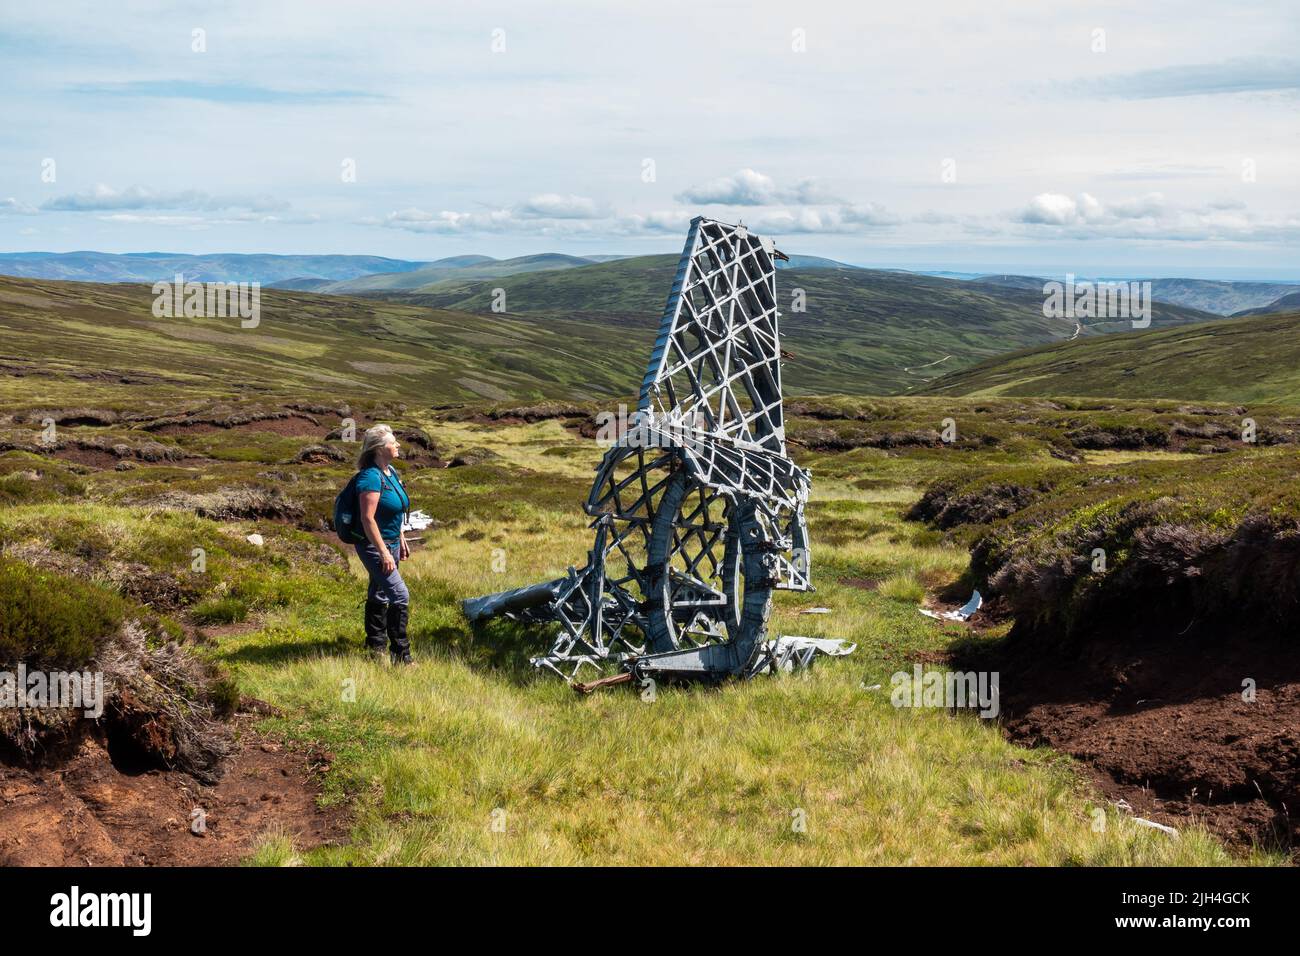 Walker looks at part of the tail of a Vickers Wellington bomber wreckage that crashed in 1942 on a hill near Ben Tirran in Glen Clova, Angus, Scotland Stock Photo